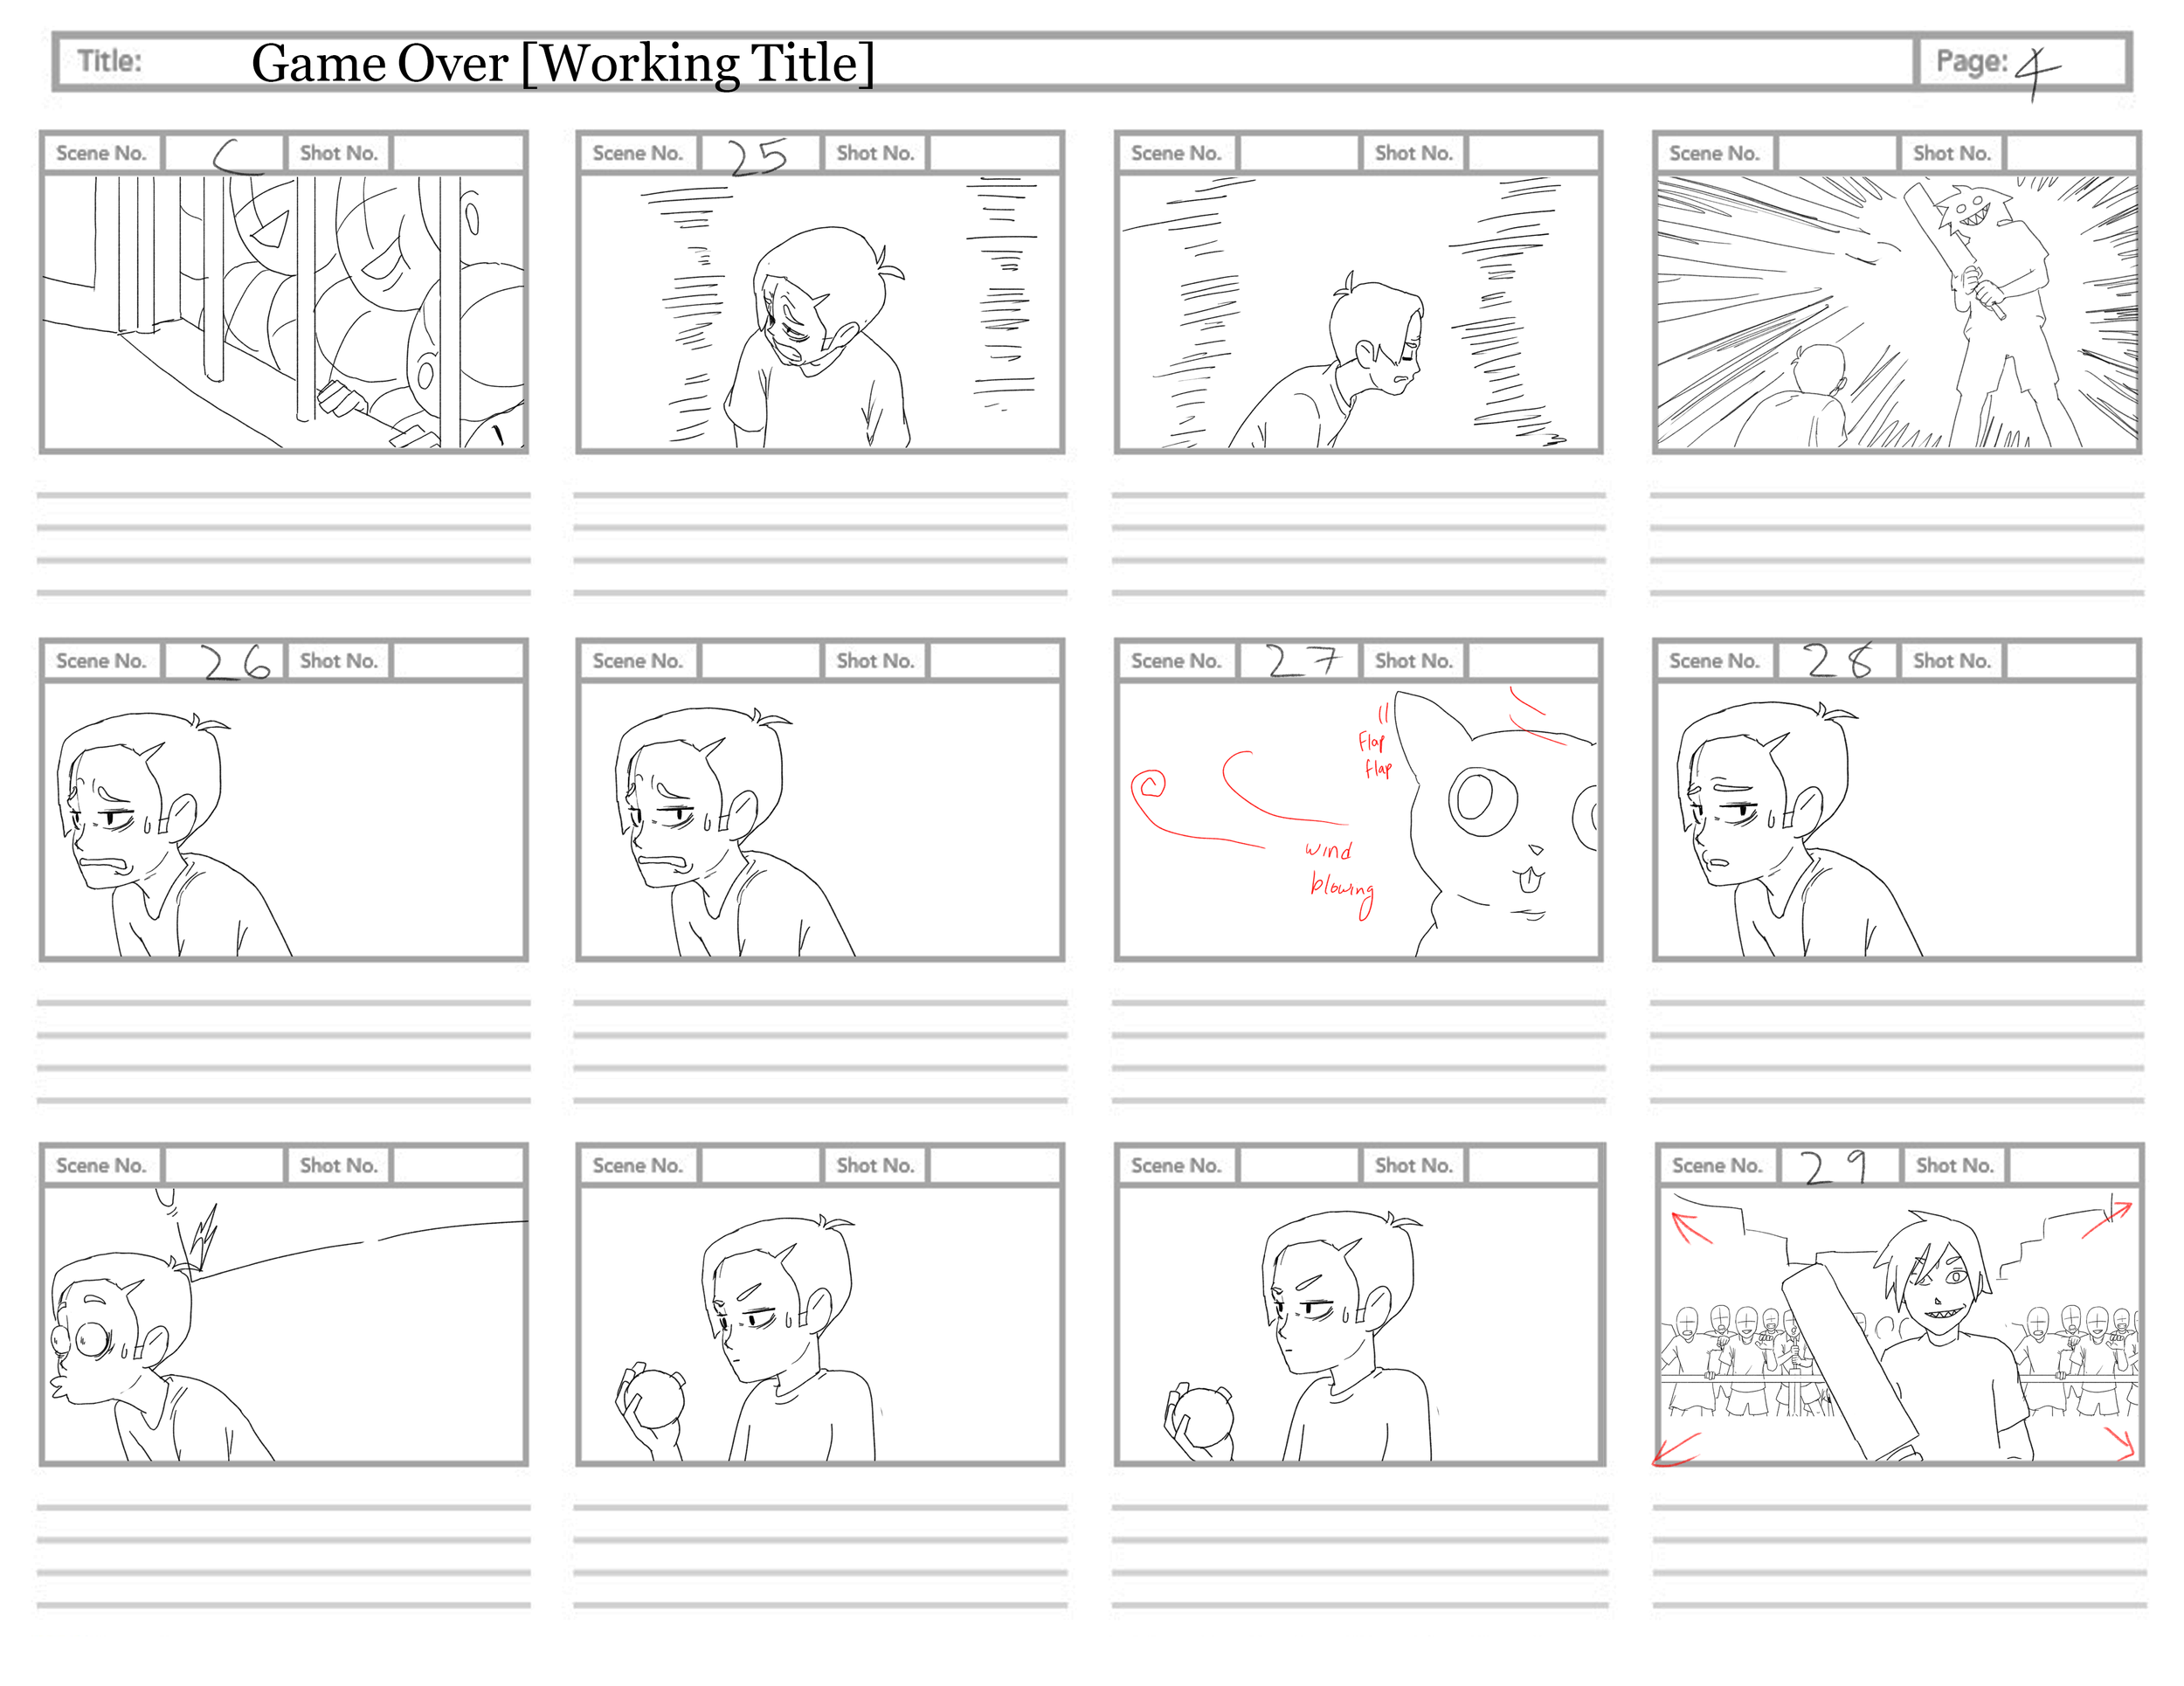 Storyboard_page 4.png